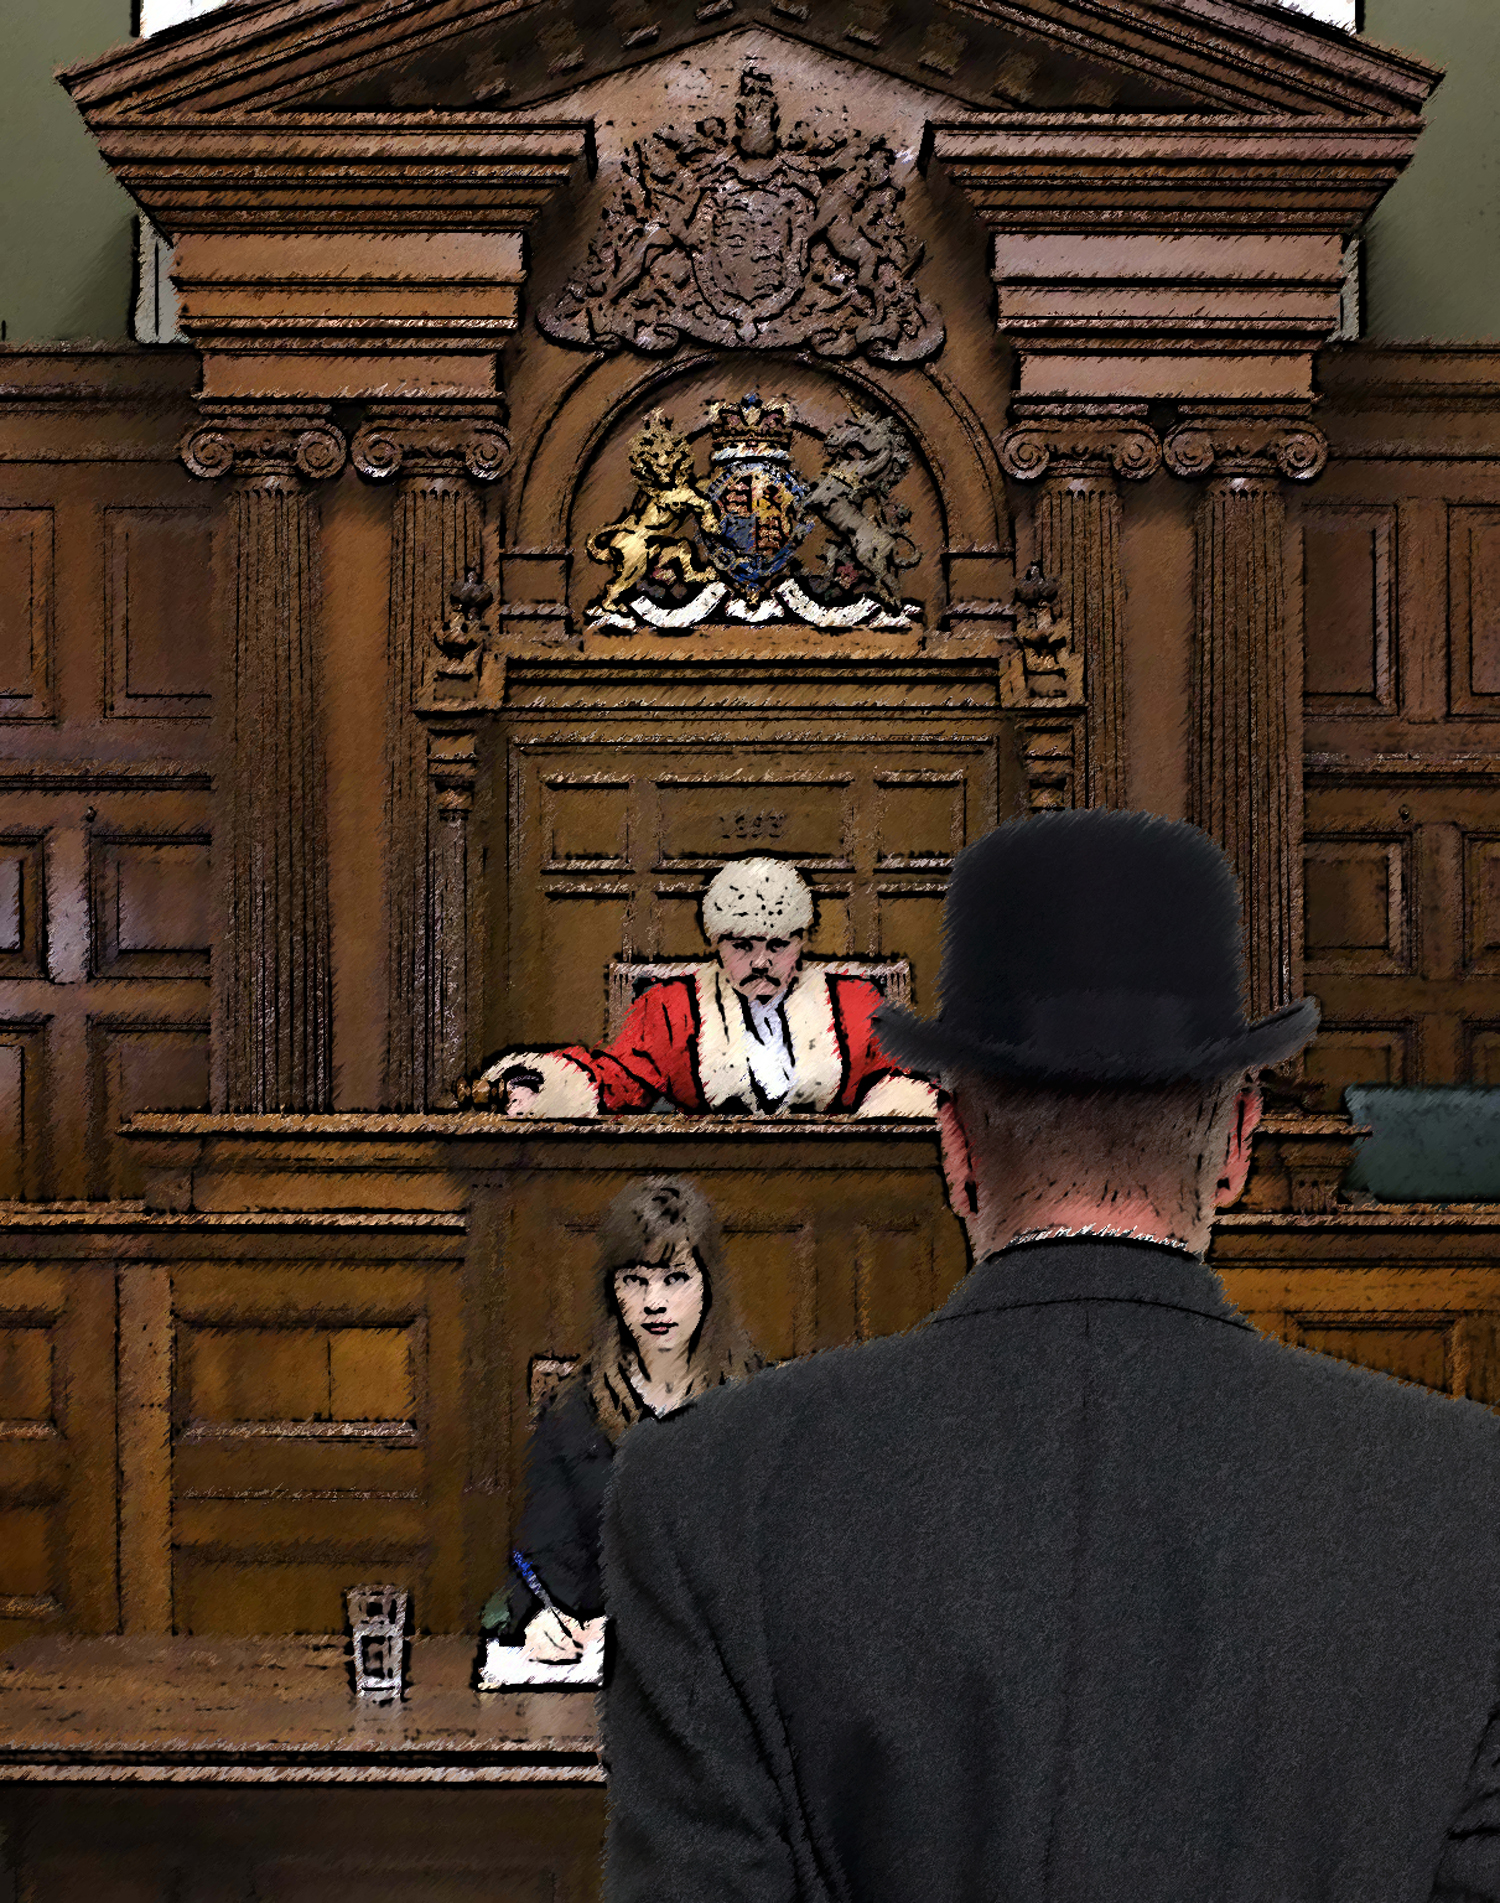 In the dock: Expert witness accountants face new risk - Accountancy Age